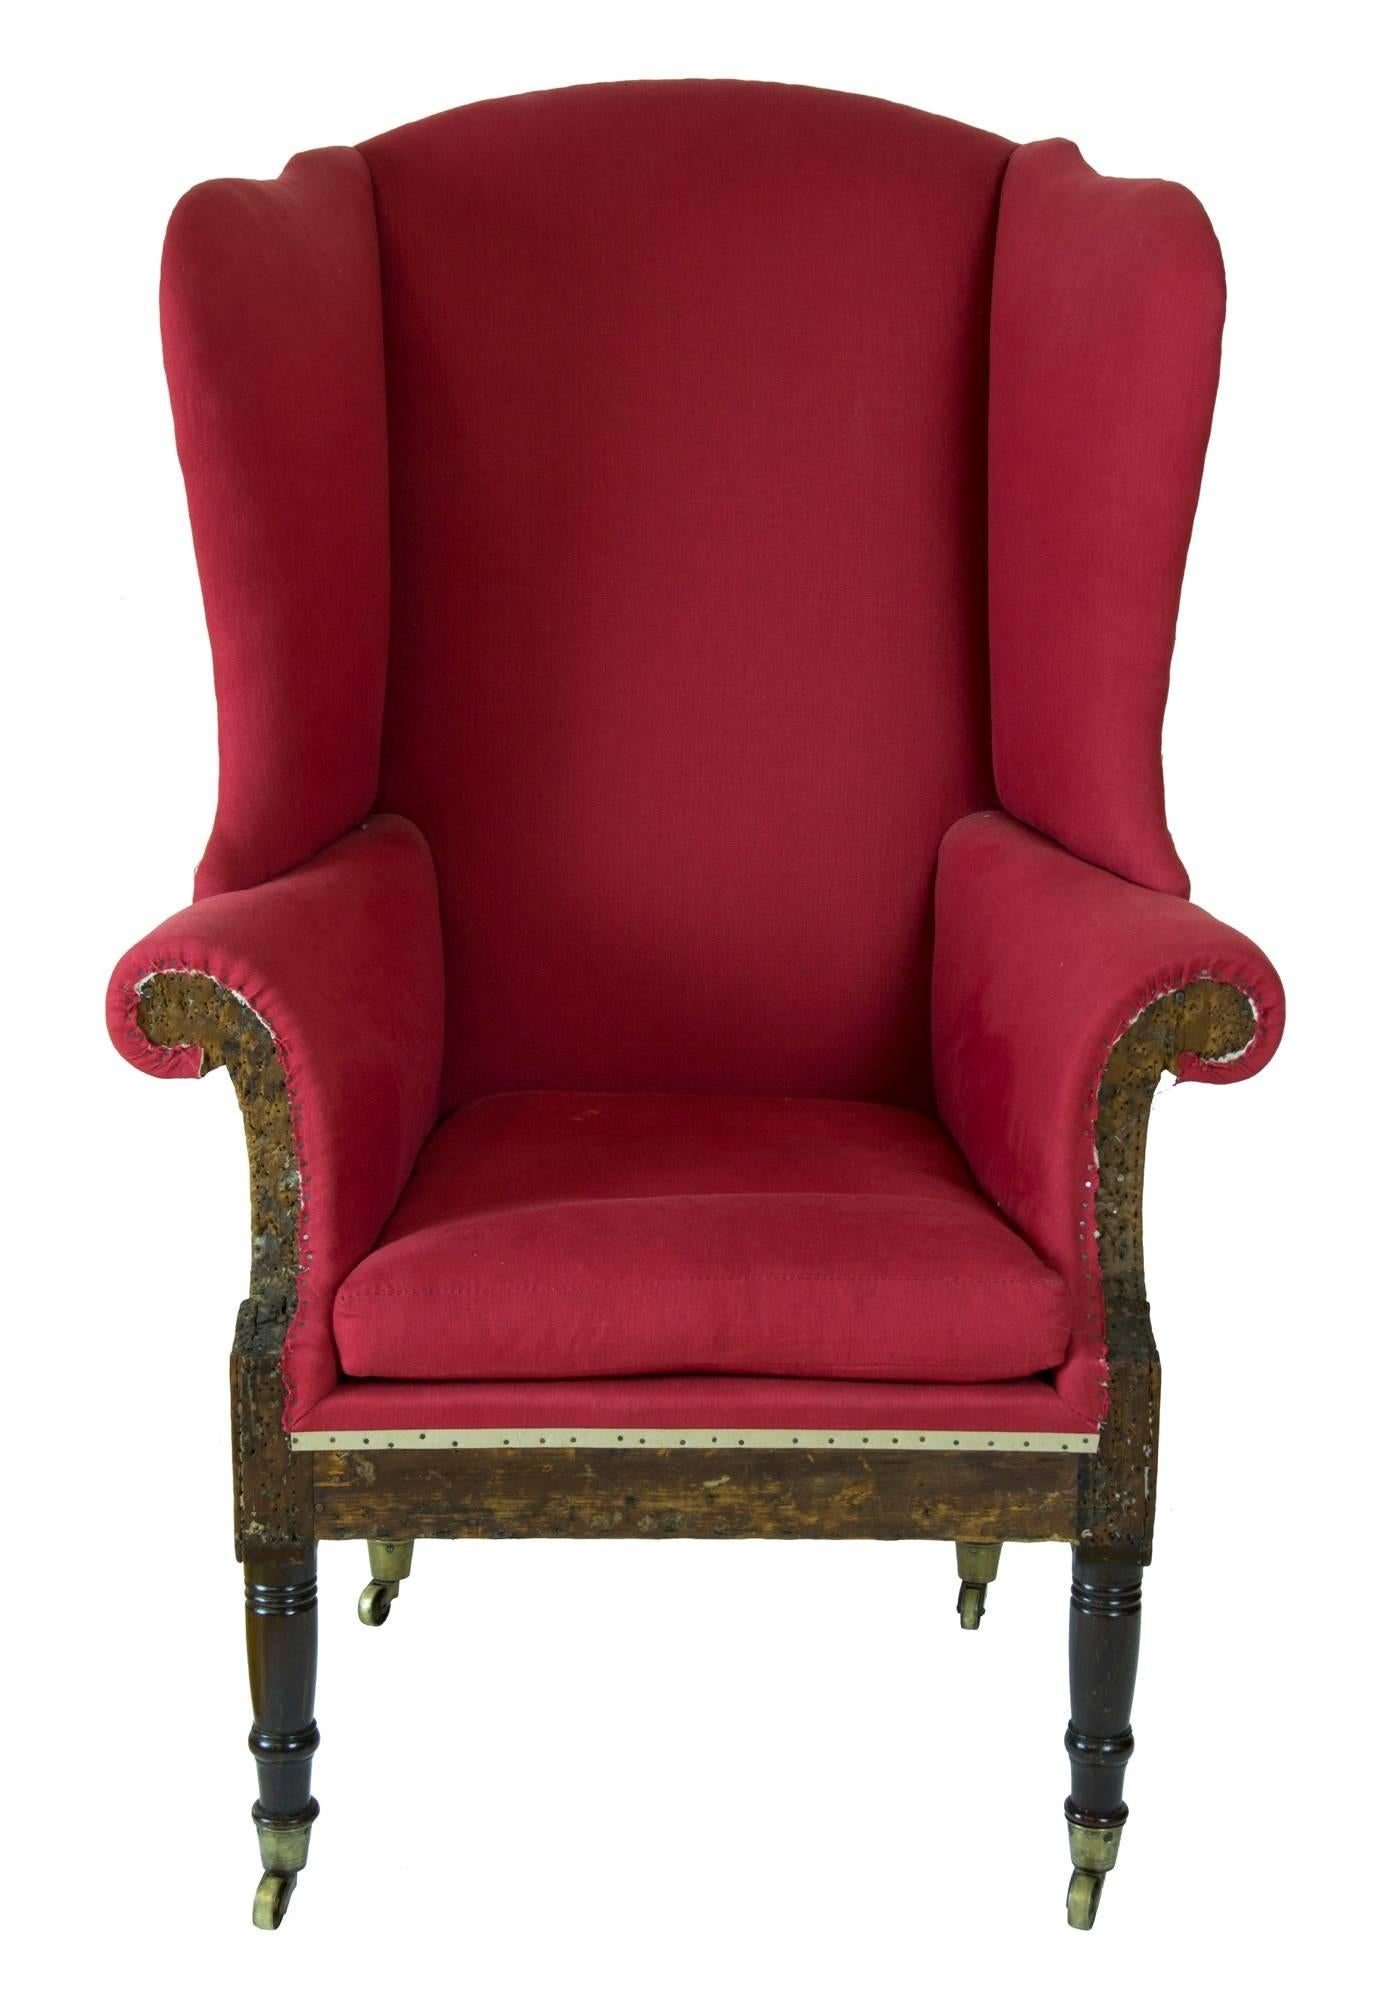 This wing chair is a little gem, as pure as they get, and we show it with the essential upholstery revealing the condition of the structure. It has museum numbers (possibly Mt. Vernon) and probably used for exhibition. 

It retains a most